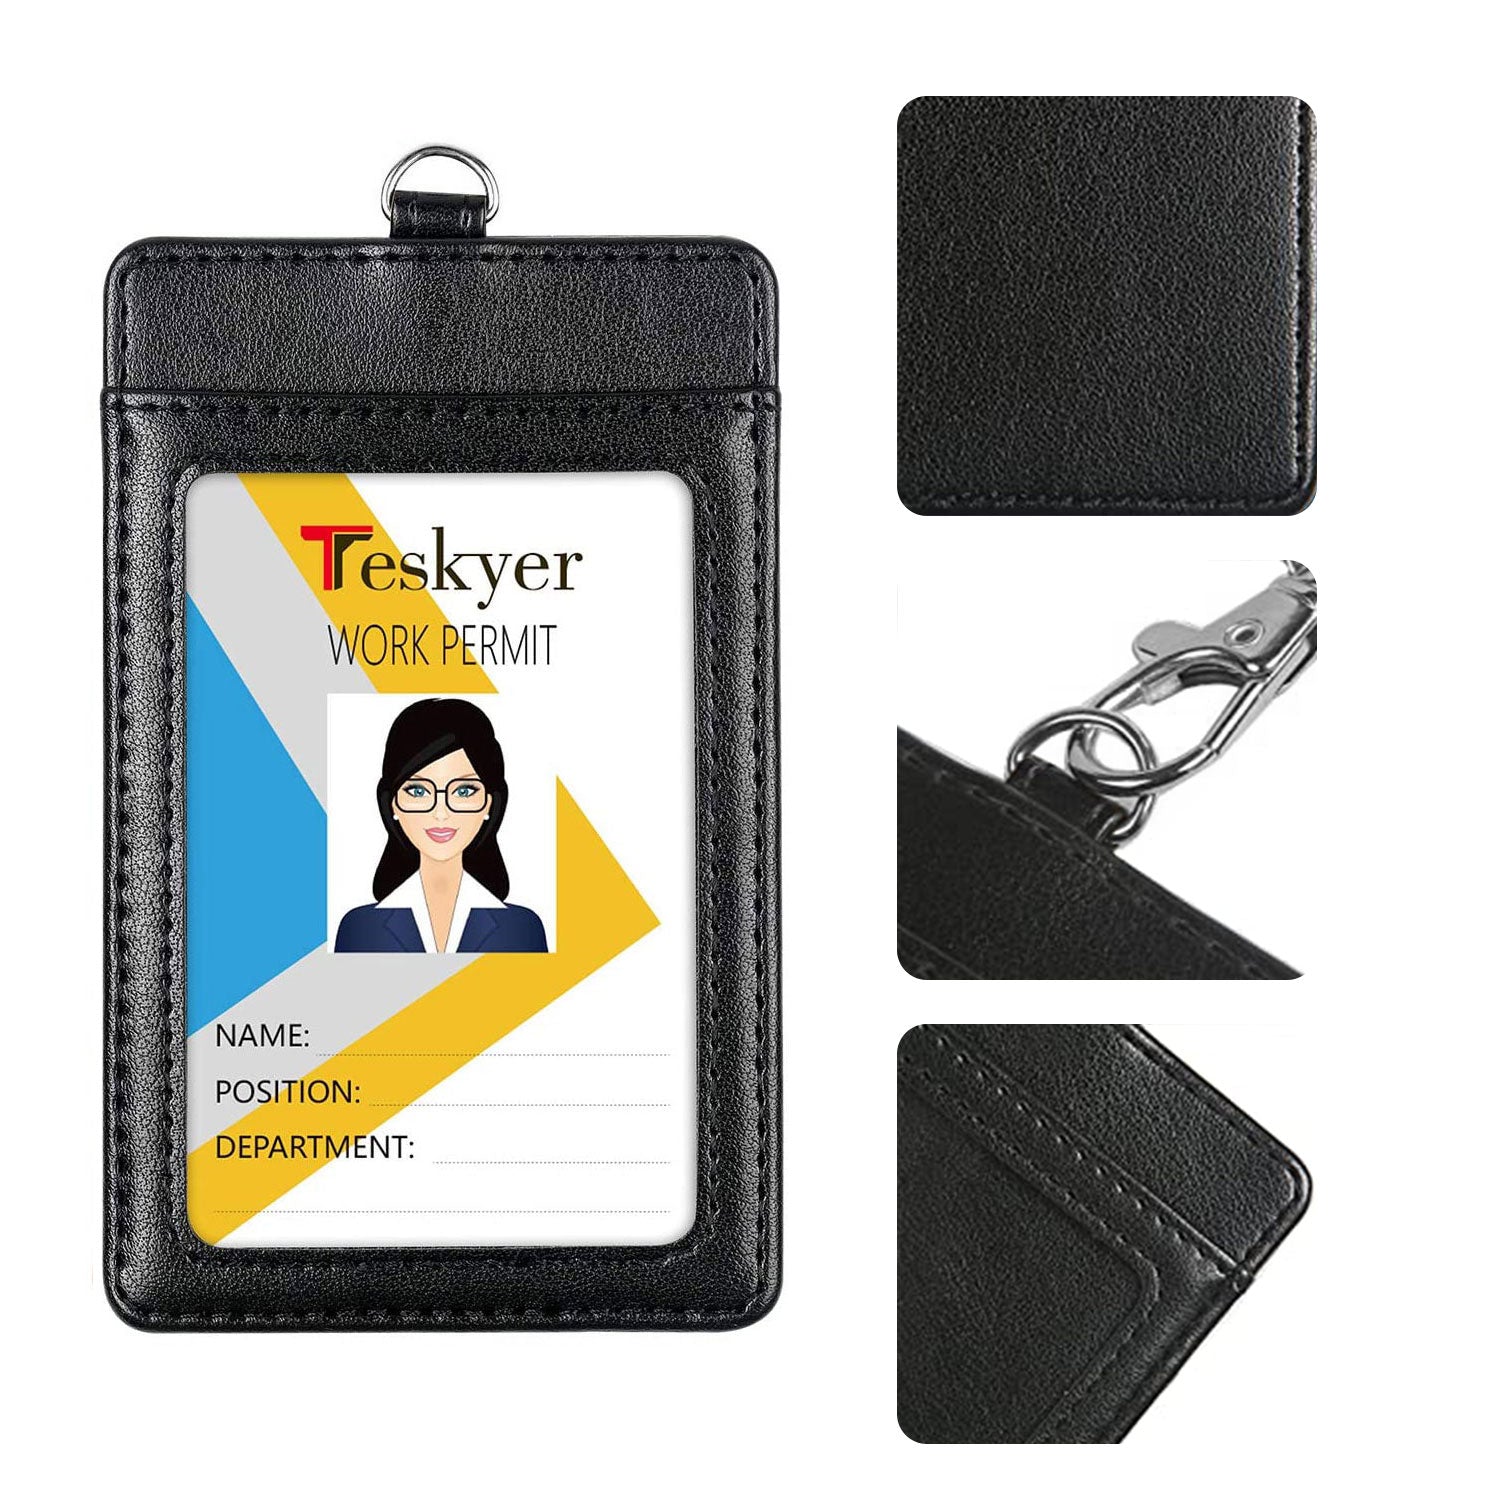  ELV Badge Holder with Zipper and Lanyard, PU Leather ID Badge  Card Holder Wallet with 5 Card Slots, RFID Blocking Pocket, Adjustable  Detachable Neck Lanyard with Keychain and Pen Holder 